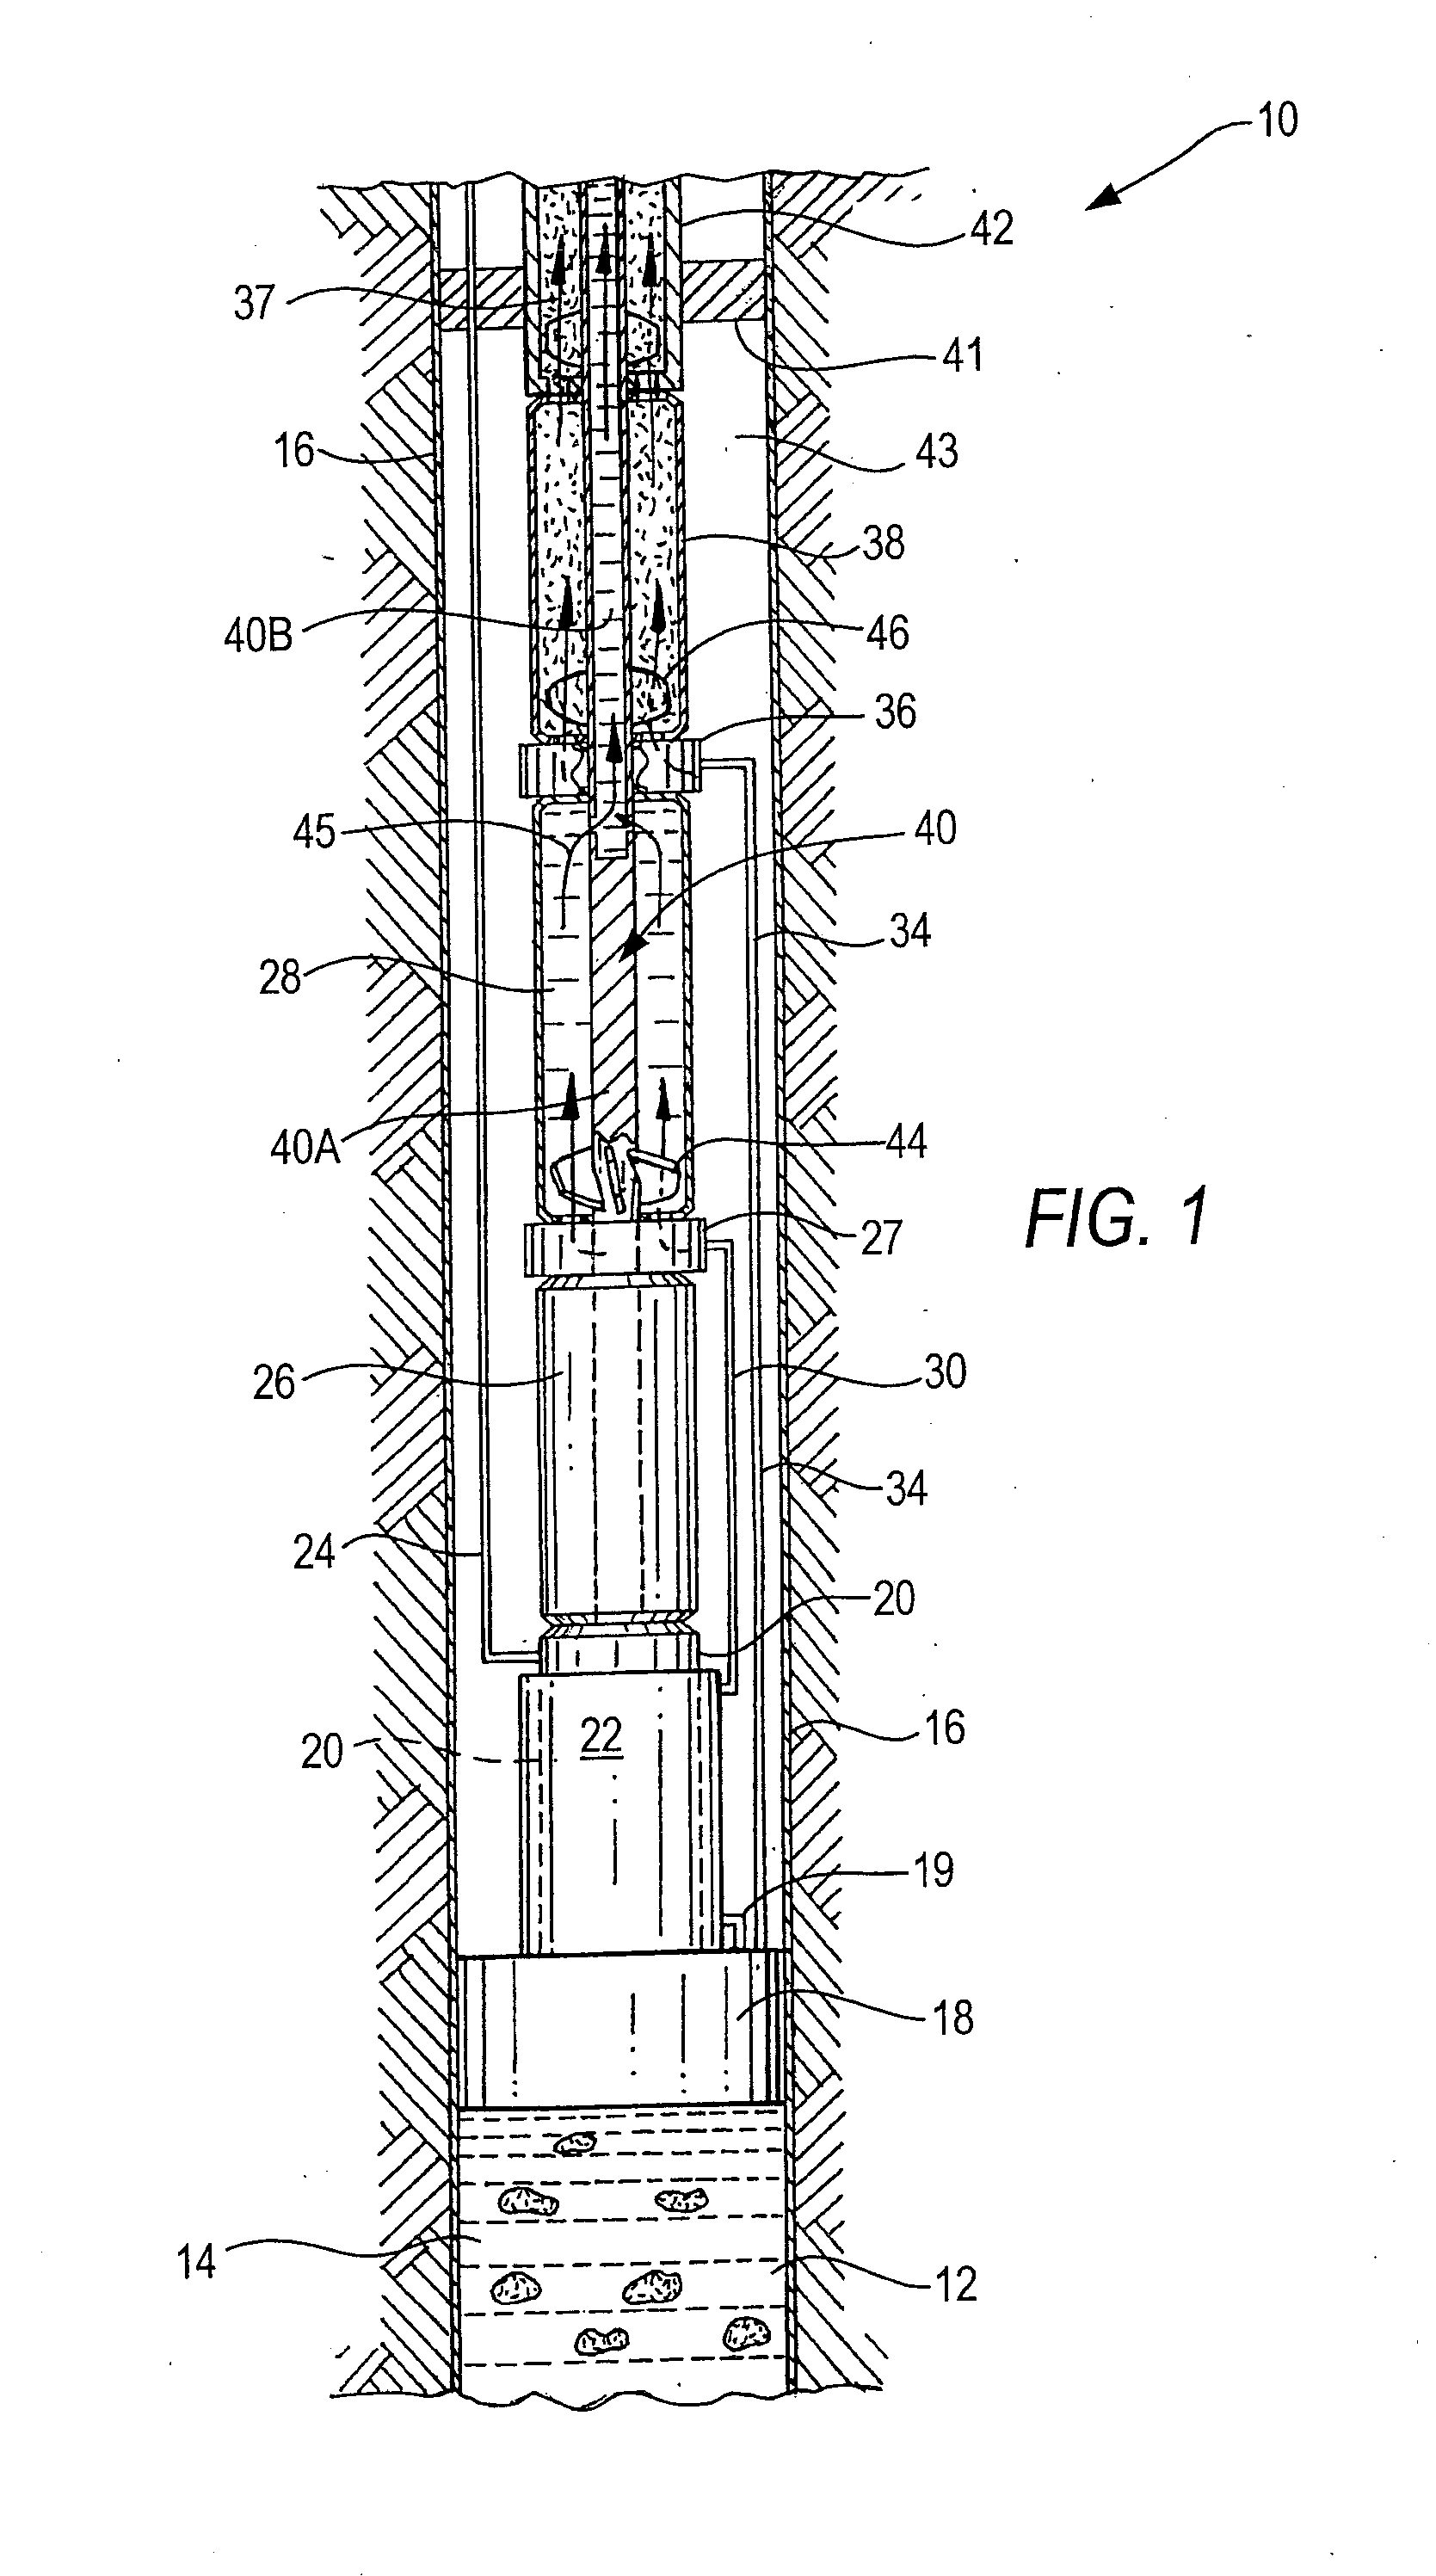 Integrated pump and compressor and method of producing multiphase well fluid downhole and at surface